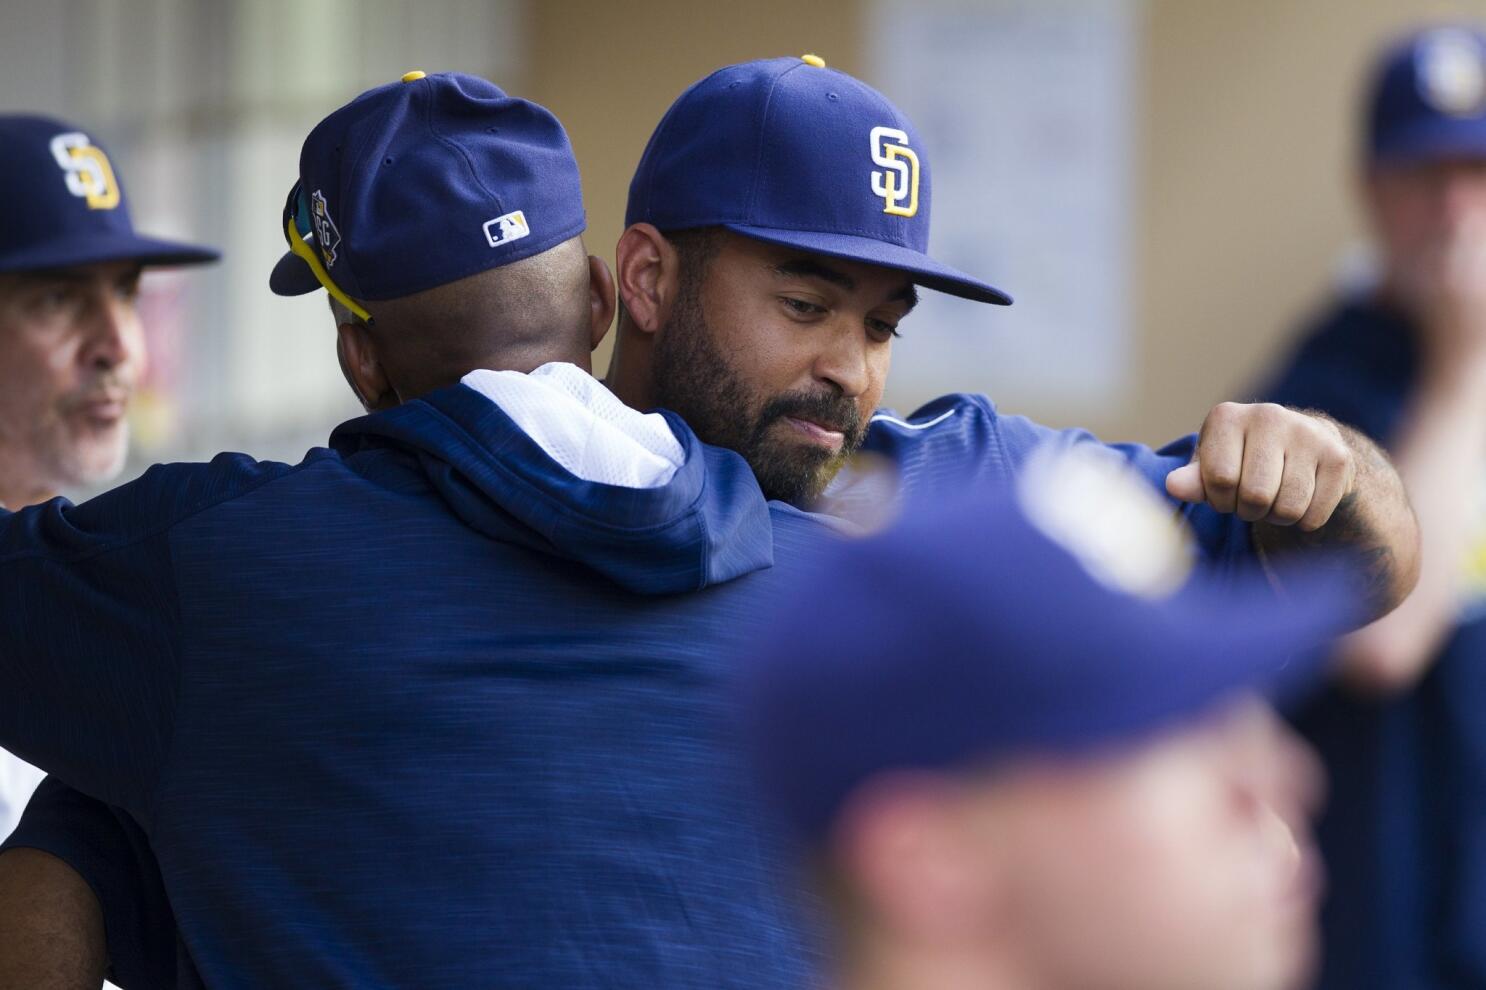 Matt Kemp and what could have been - Battery Power